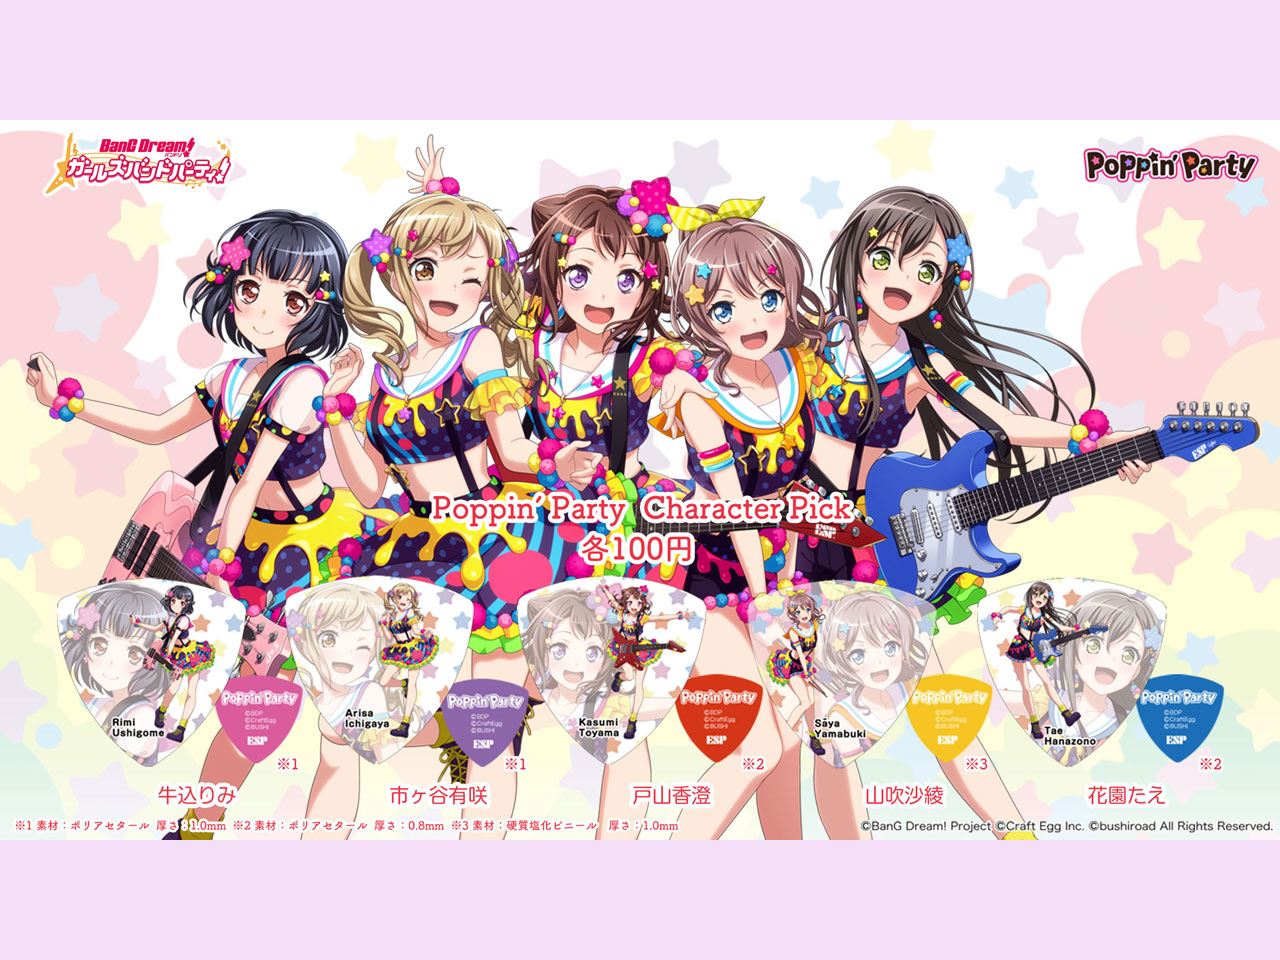 【ESP×BanG Dream!コラボピック】Poppin' Party Character Pick "花園たえ"（GBP Tae 2）& "ハメパチ" セット